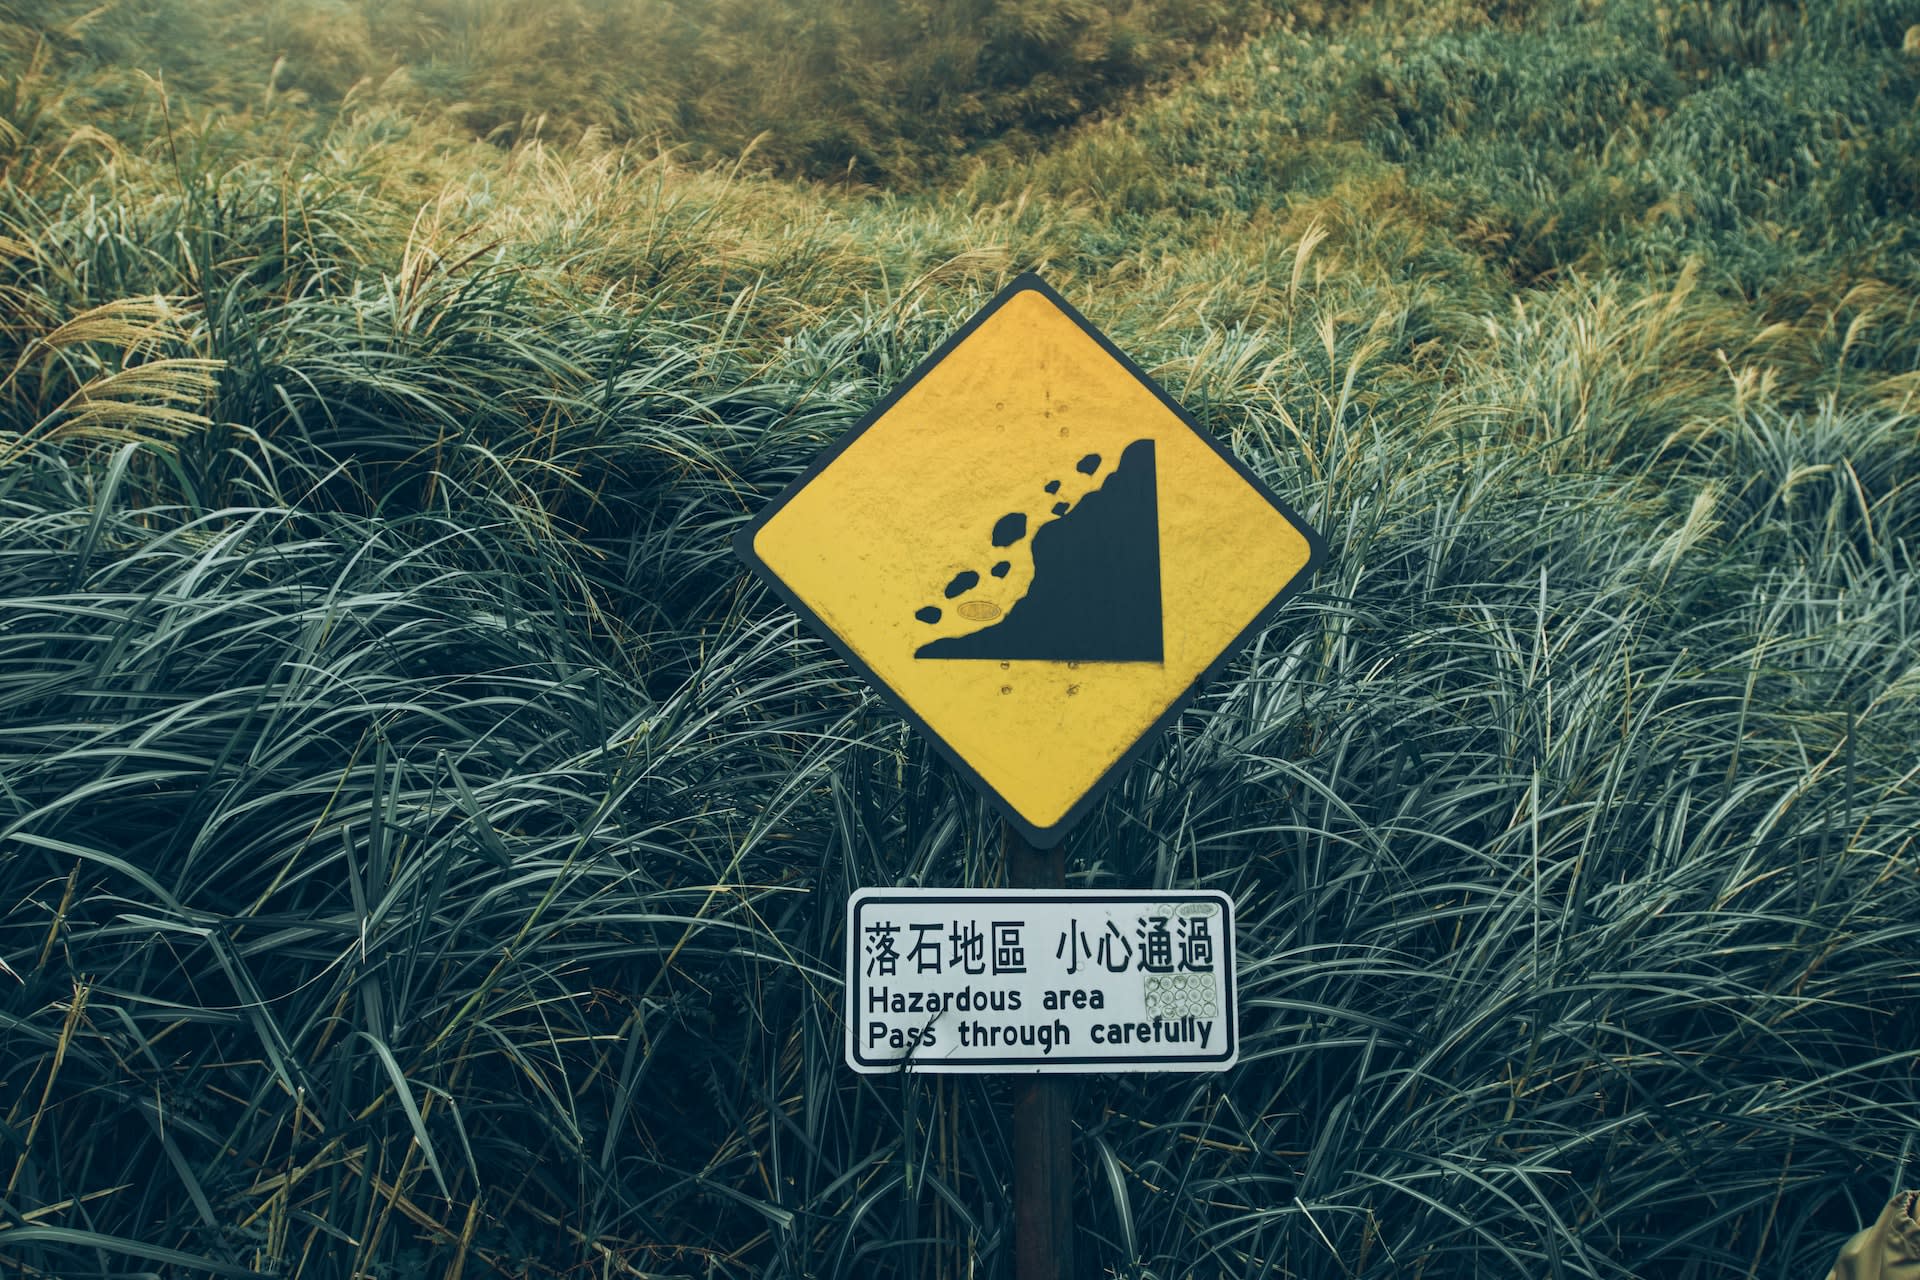 Hazard sign in a grassy field warning of falling rocks in English and Japanese